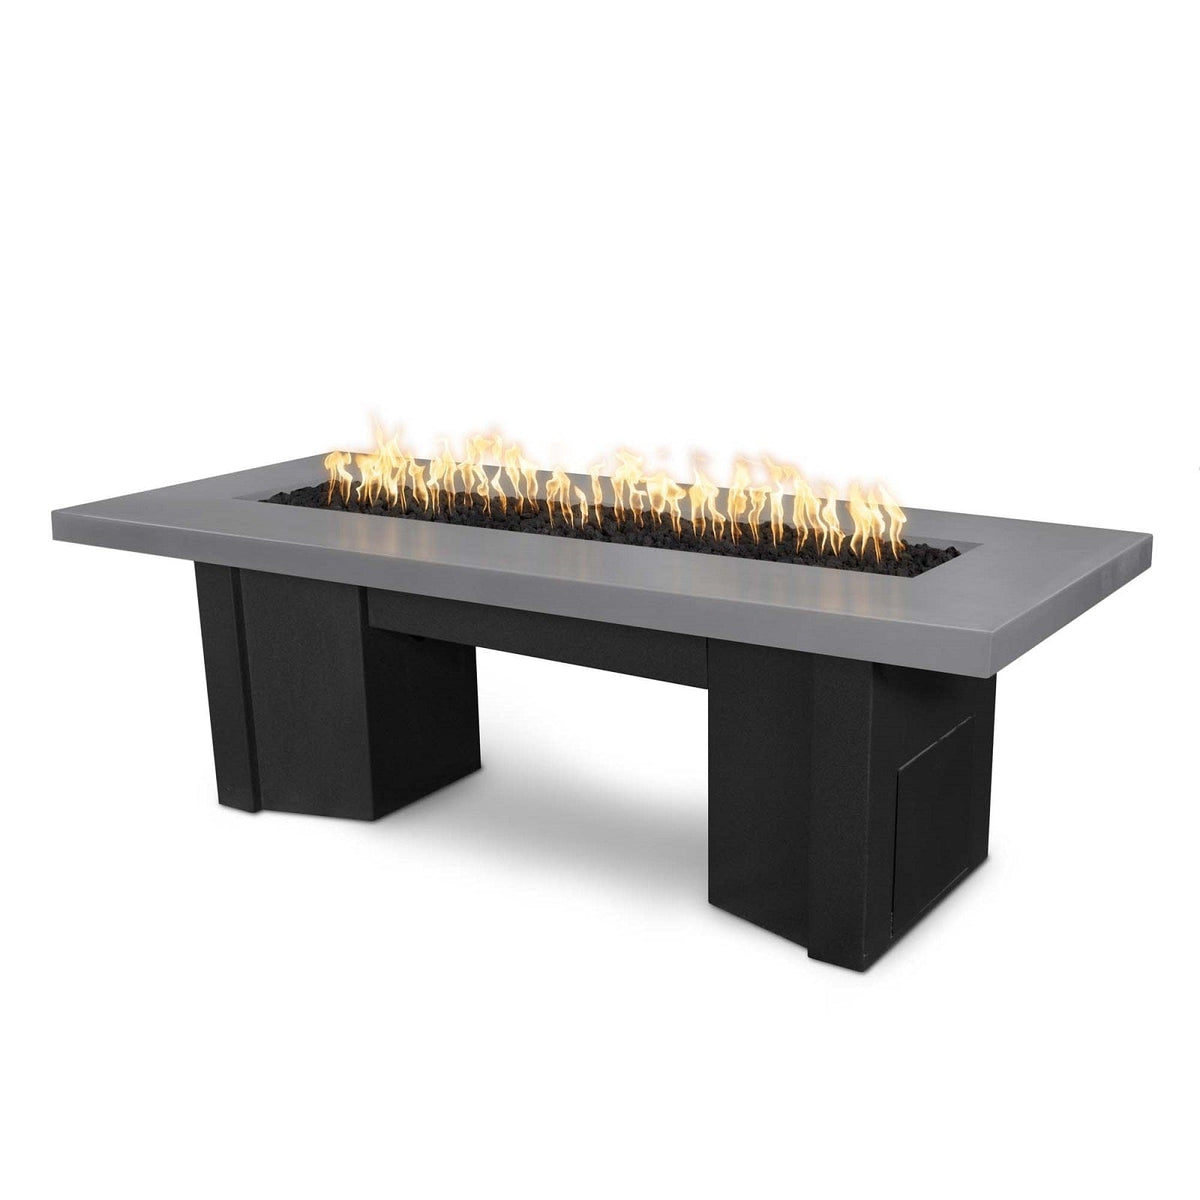 The Outdoor Plus Fire Features Natural Gray (-NGY) / Black Powder Coated Steel (-BLK) The Outdoor Plus 60&quot; Alameda Fire Table Smooth Concrete in Natural Gas - Flame Sense System with Push Button Spark Igniter / OPT-ALMGFRC60FSEN-NG